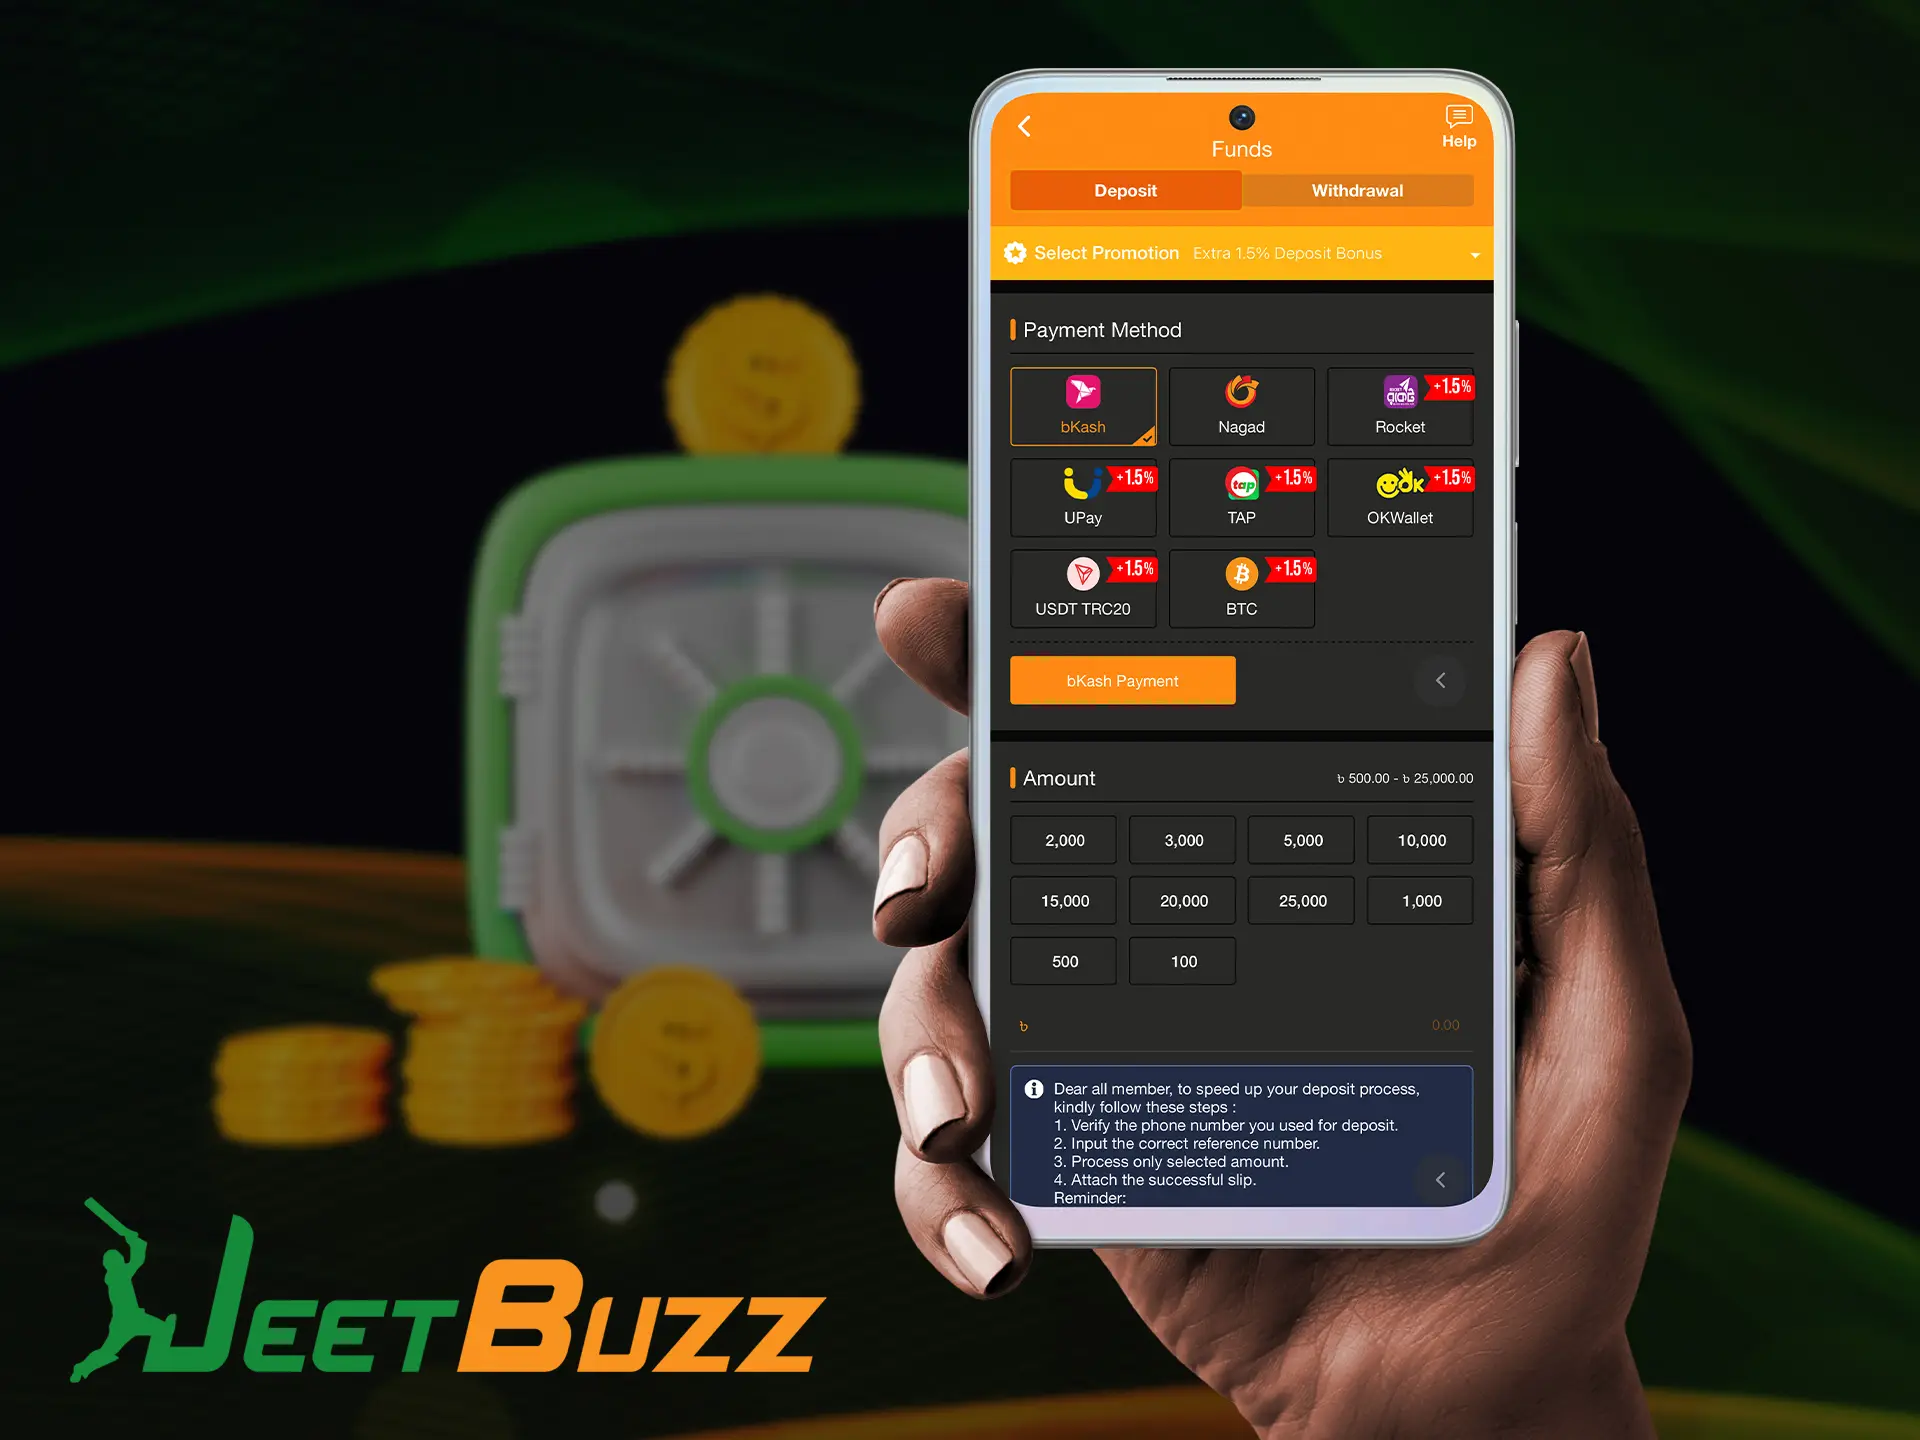 JeetBuzz provides safe and fast payments.